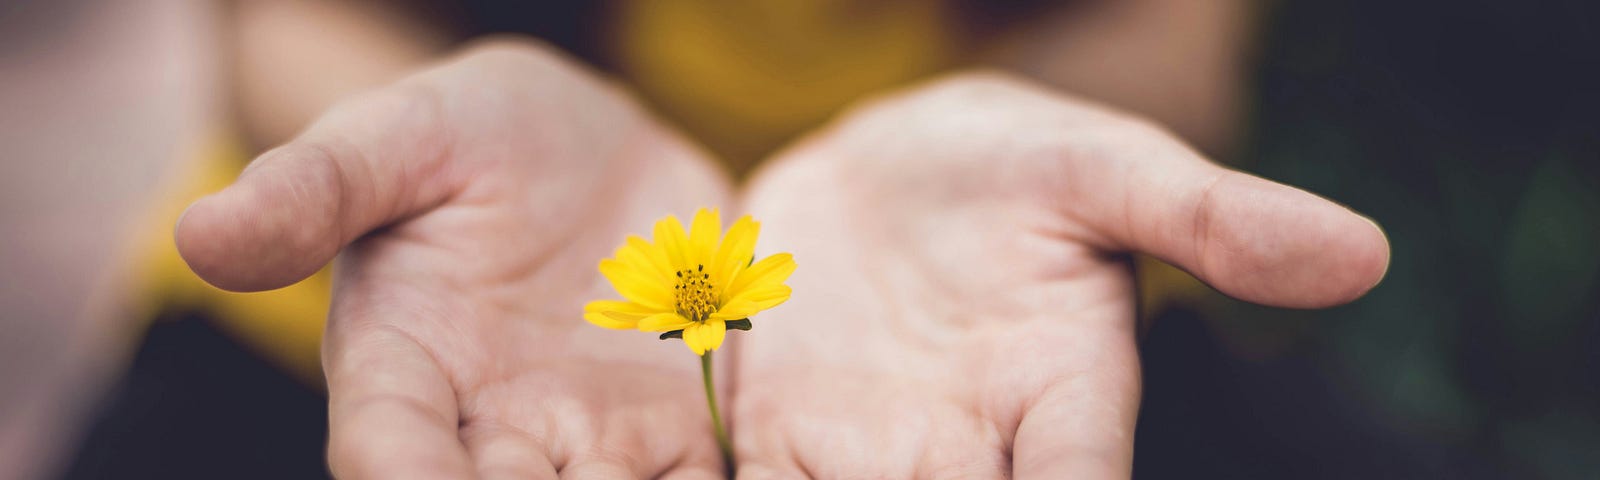 Little yellow flower between two hands, in a posture of offering. Symbol of the attention to the present moment.